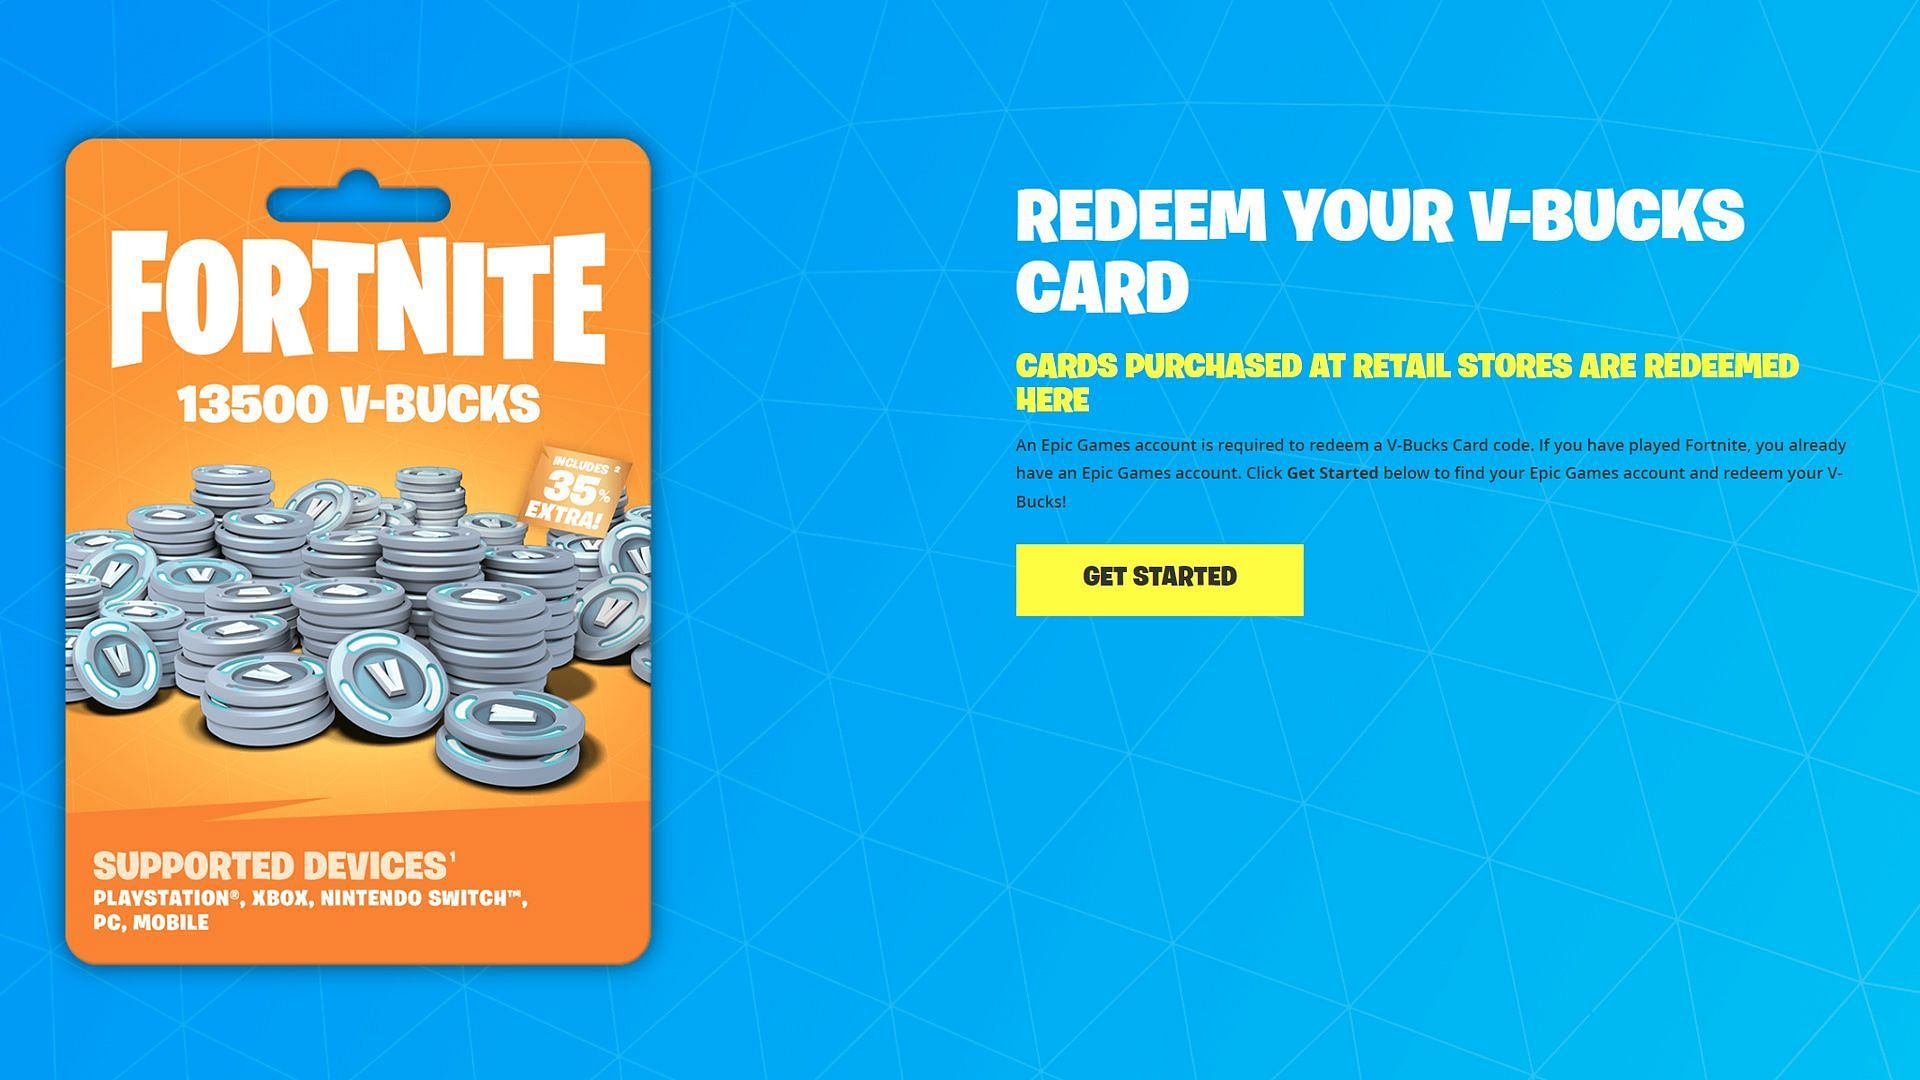 Redeeming a Fortnite gift card is a simple process that involves heading to the Epic Games website (Image via Epic Games)